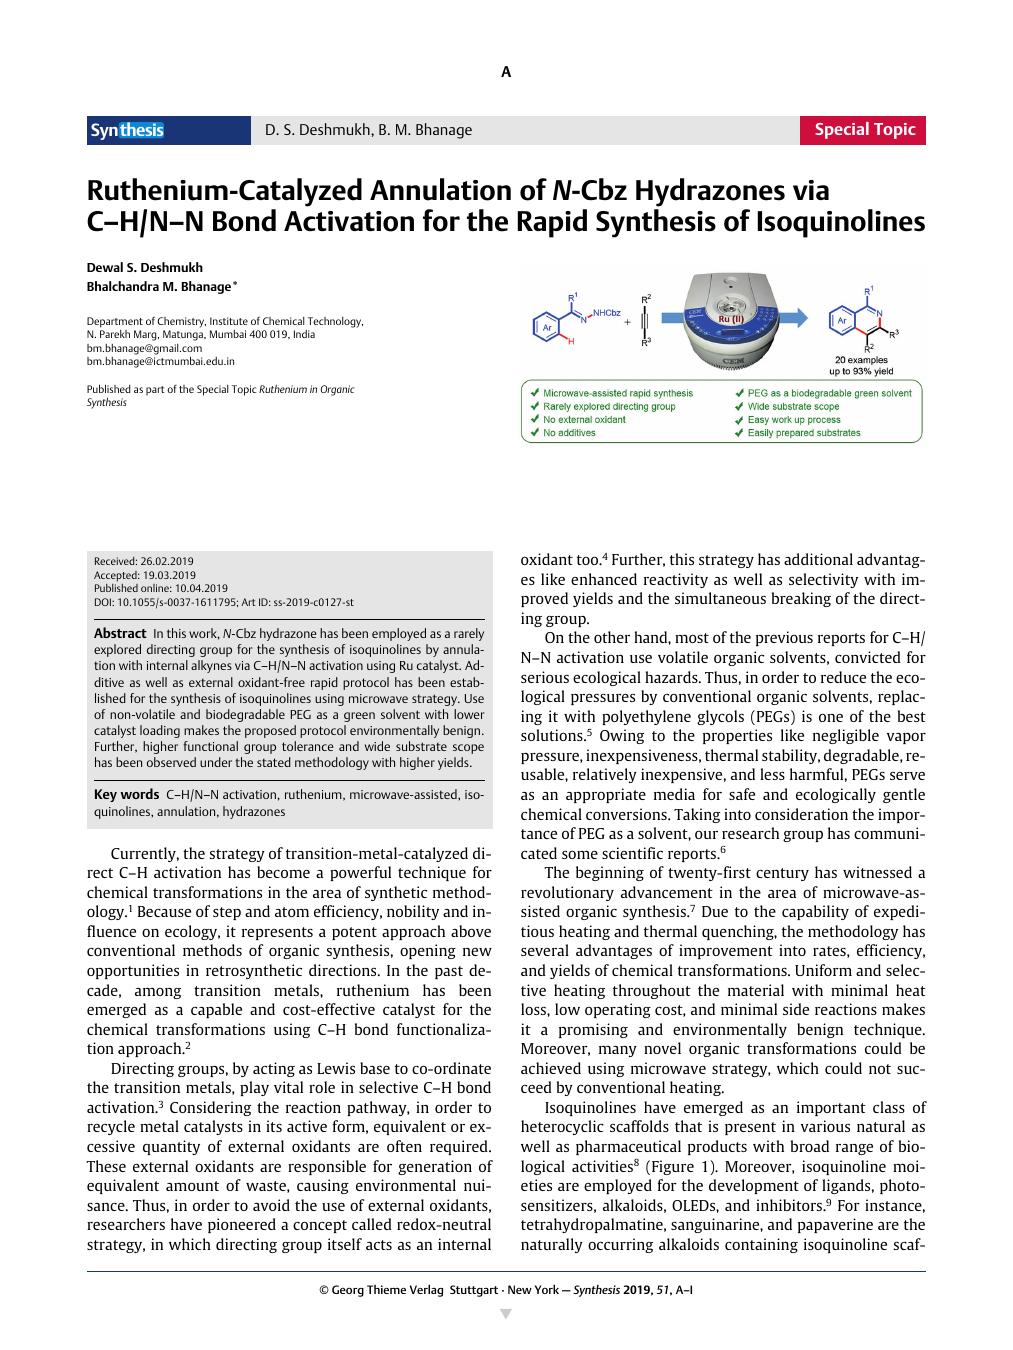 Ruthenium Catalyzed Annulation Of N Cbz Hydrazones Via C H N N Bond Activation For The Rapid Synthesis Of Isoquinolines Synthesis X Mol